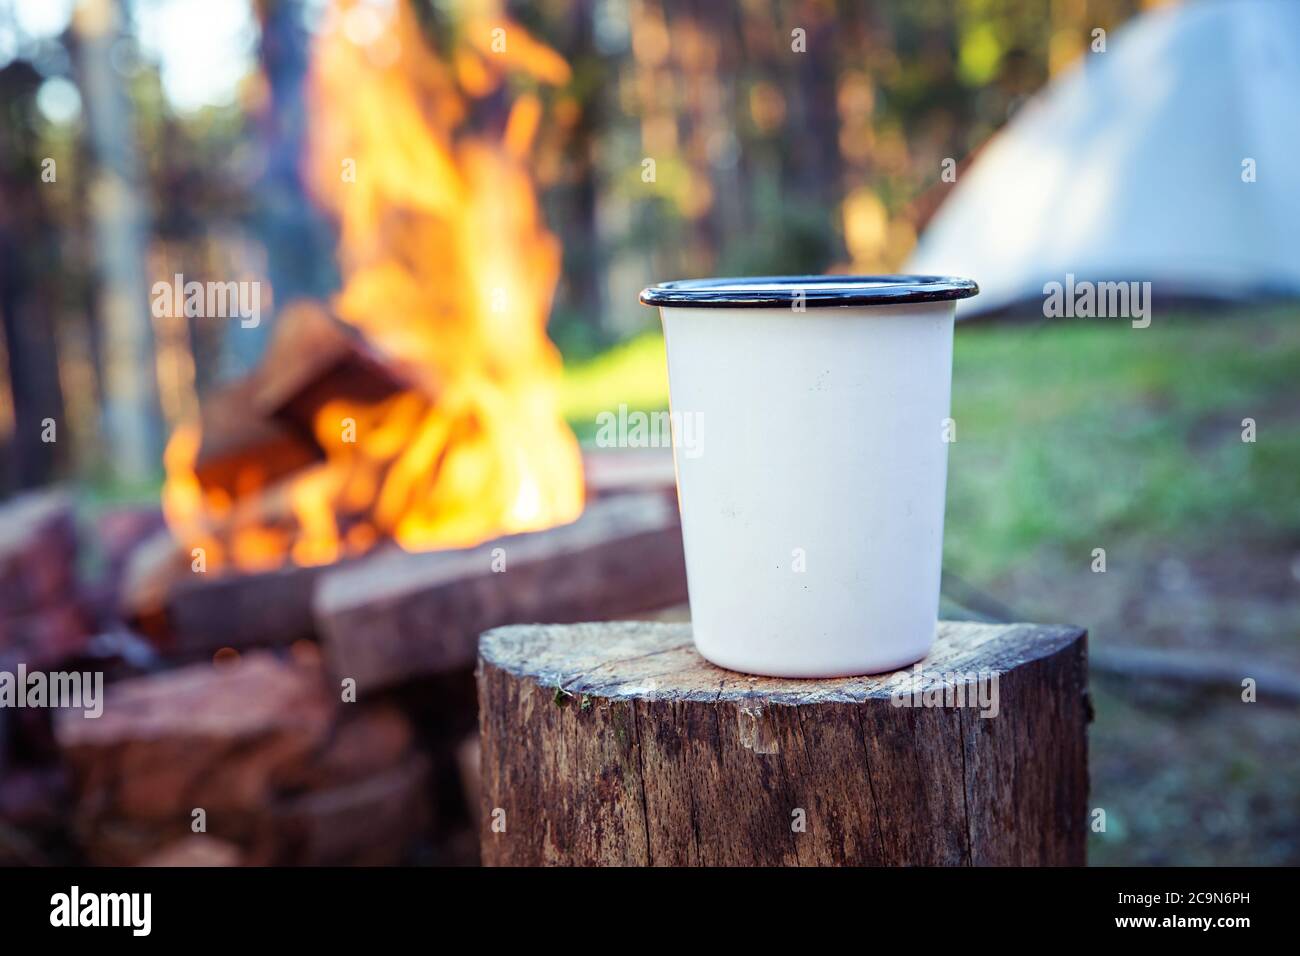 Campfire Coffee Almost Tastes Great - Oregon Photography